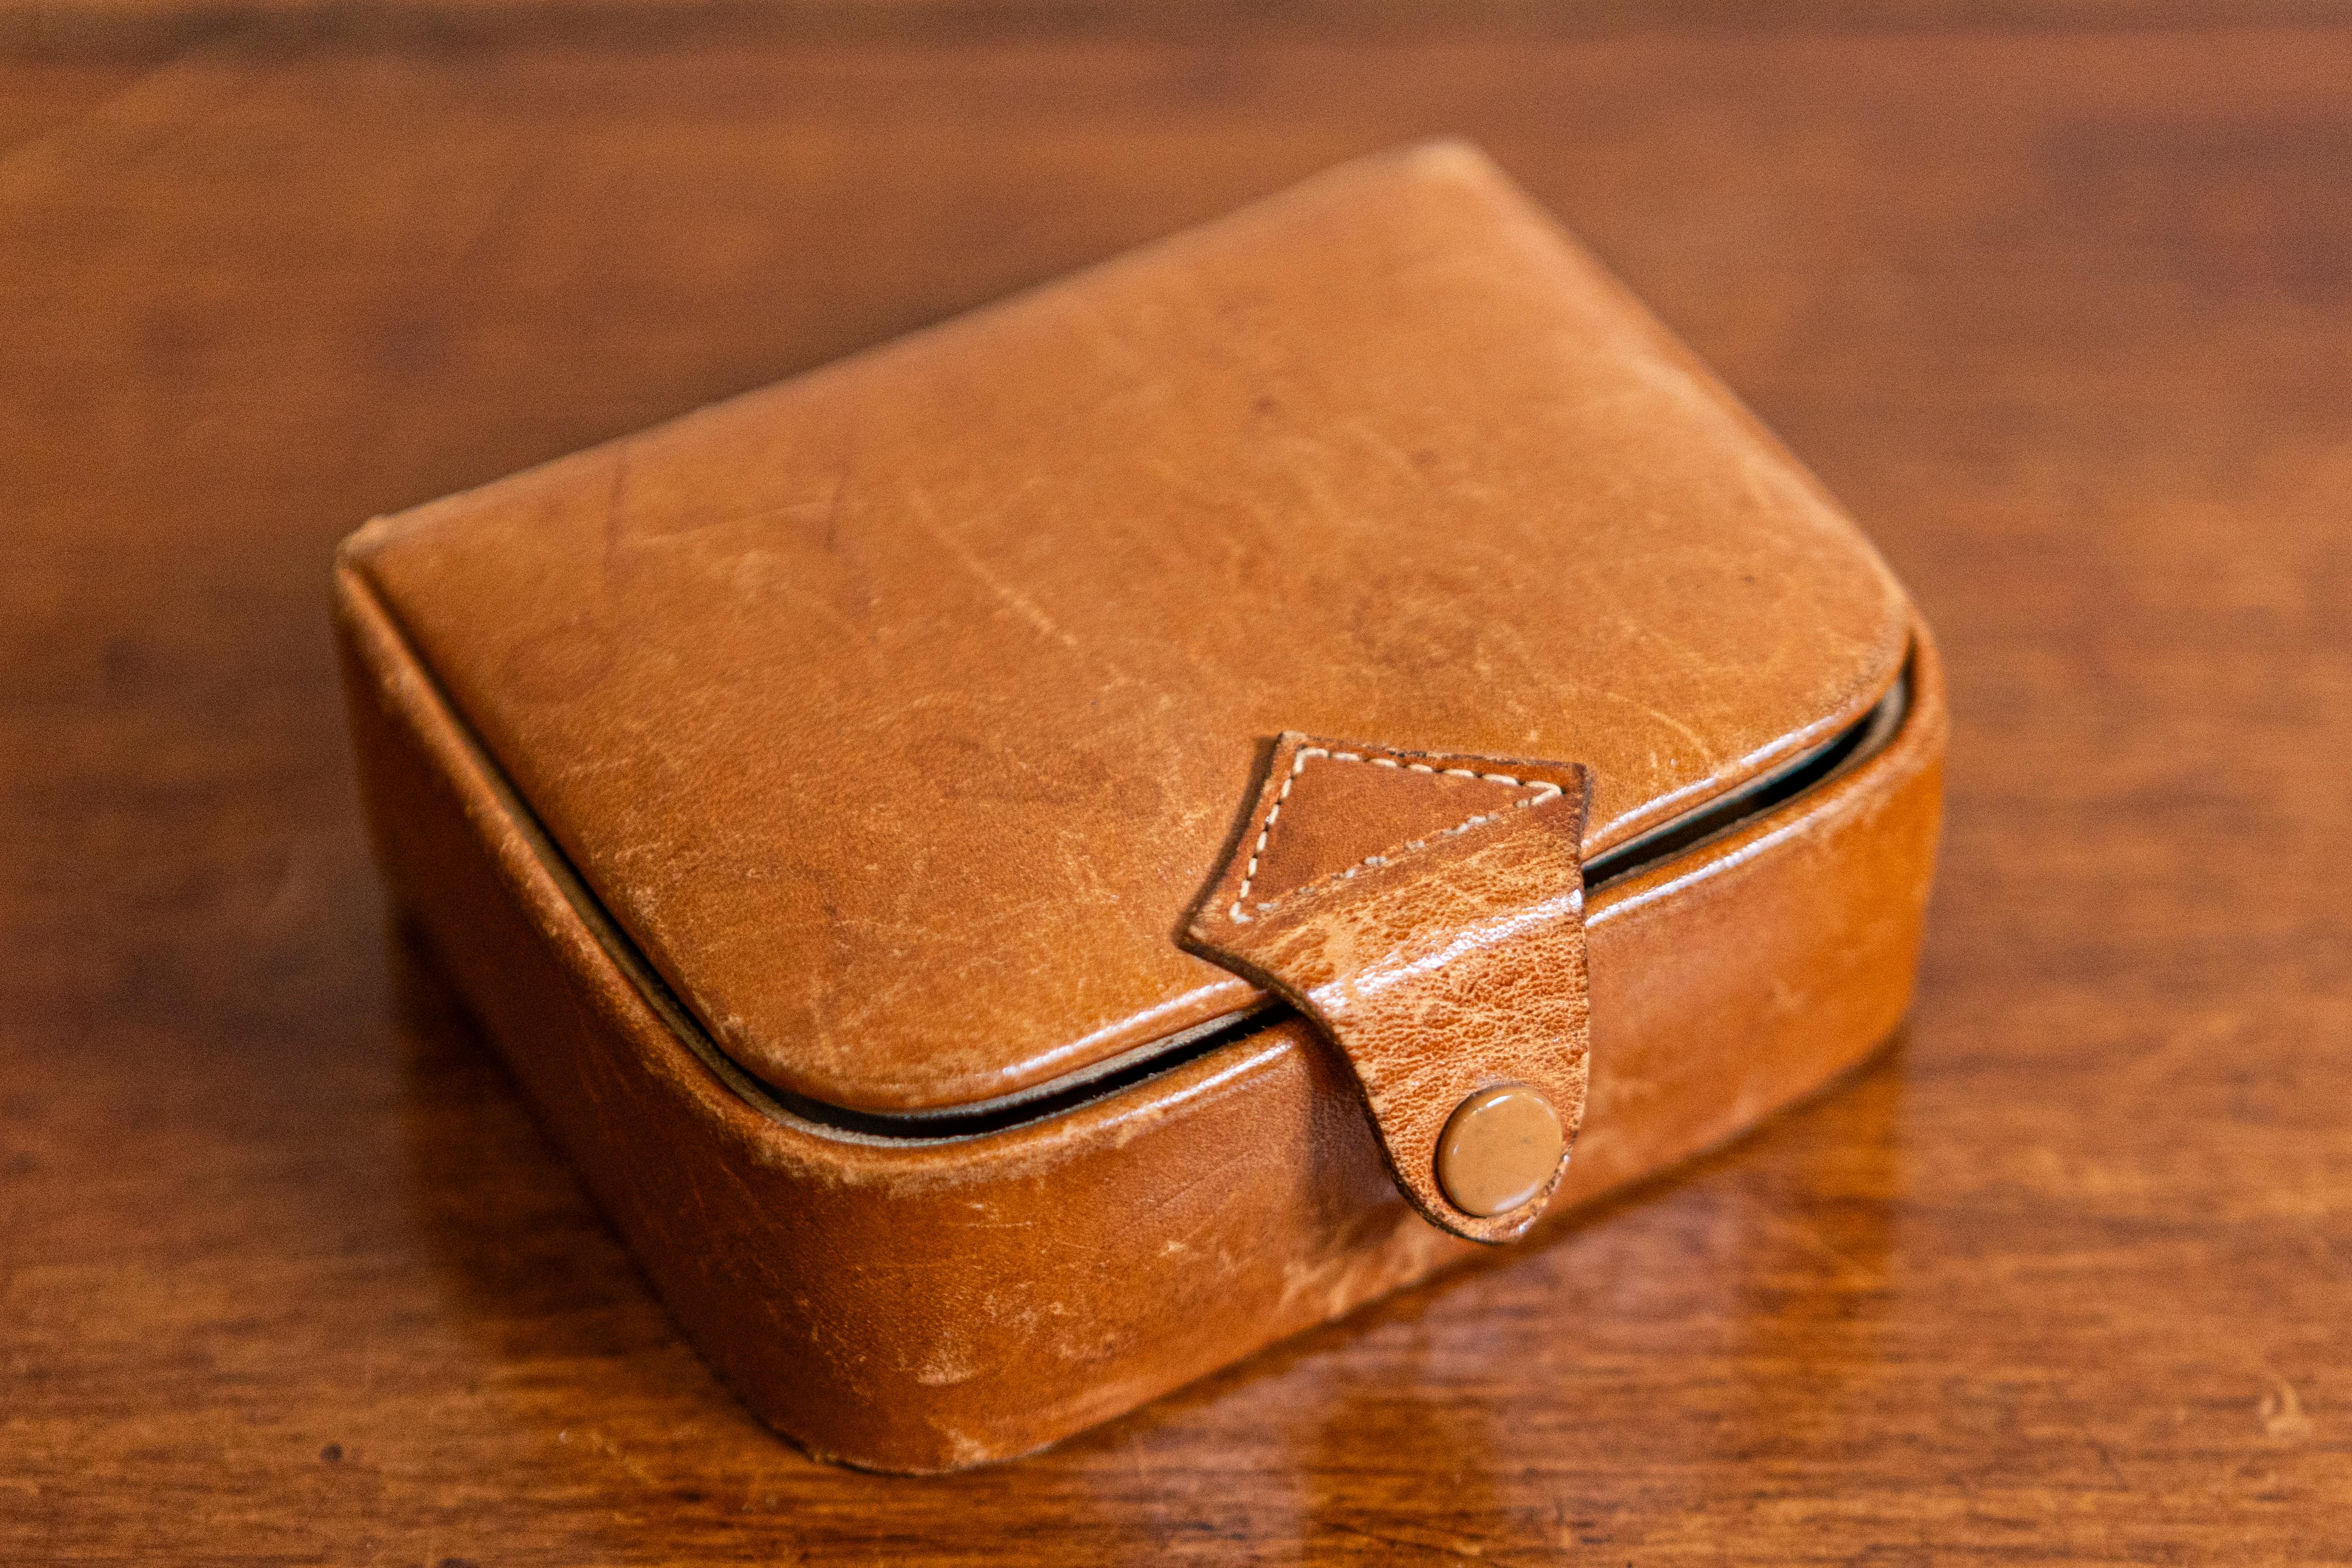 A small antique Camalier & Buckley leather case from the 20th century with buttoned strap. Founded in the 1930s in the United States, Camalier & Buckley produced this handsome leather case boasting a caramel color and a small buttoned strap. Perfect